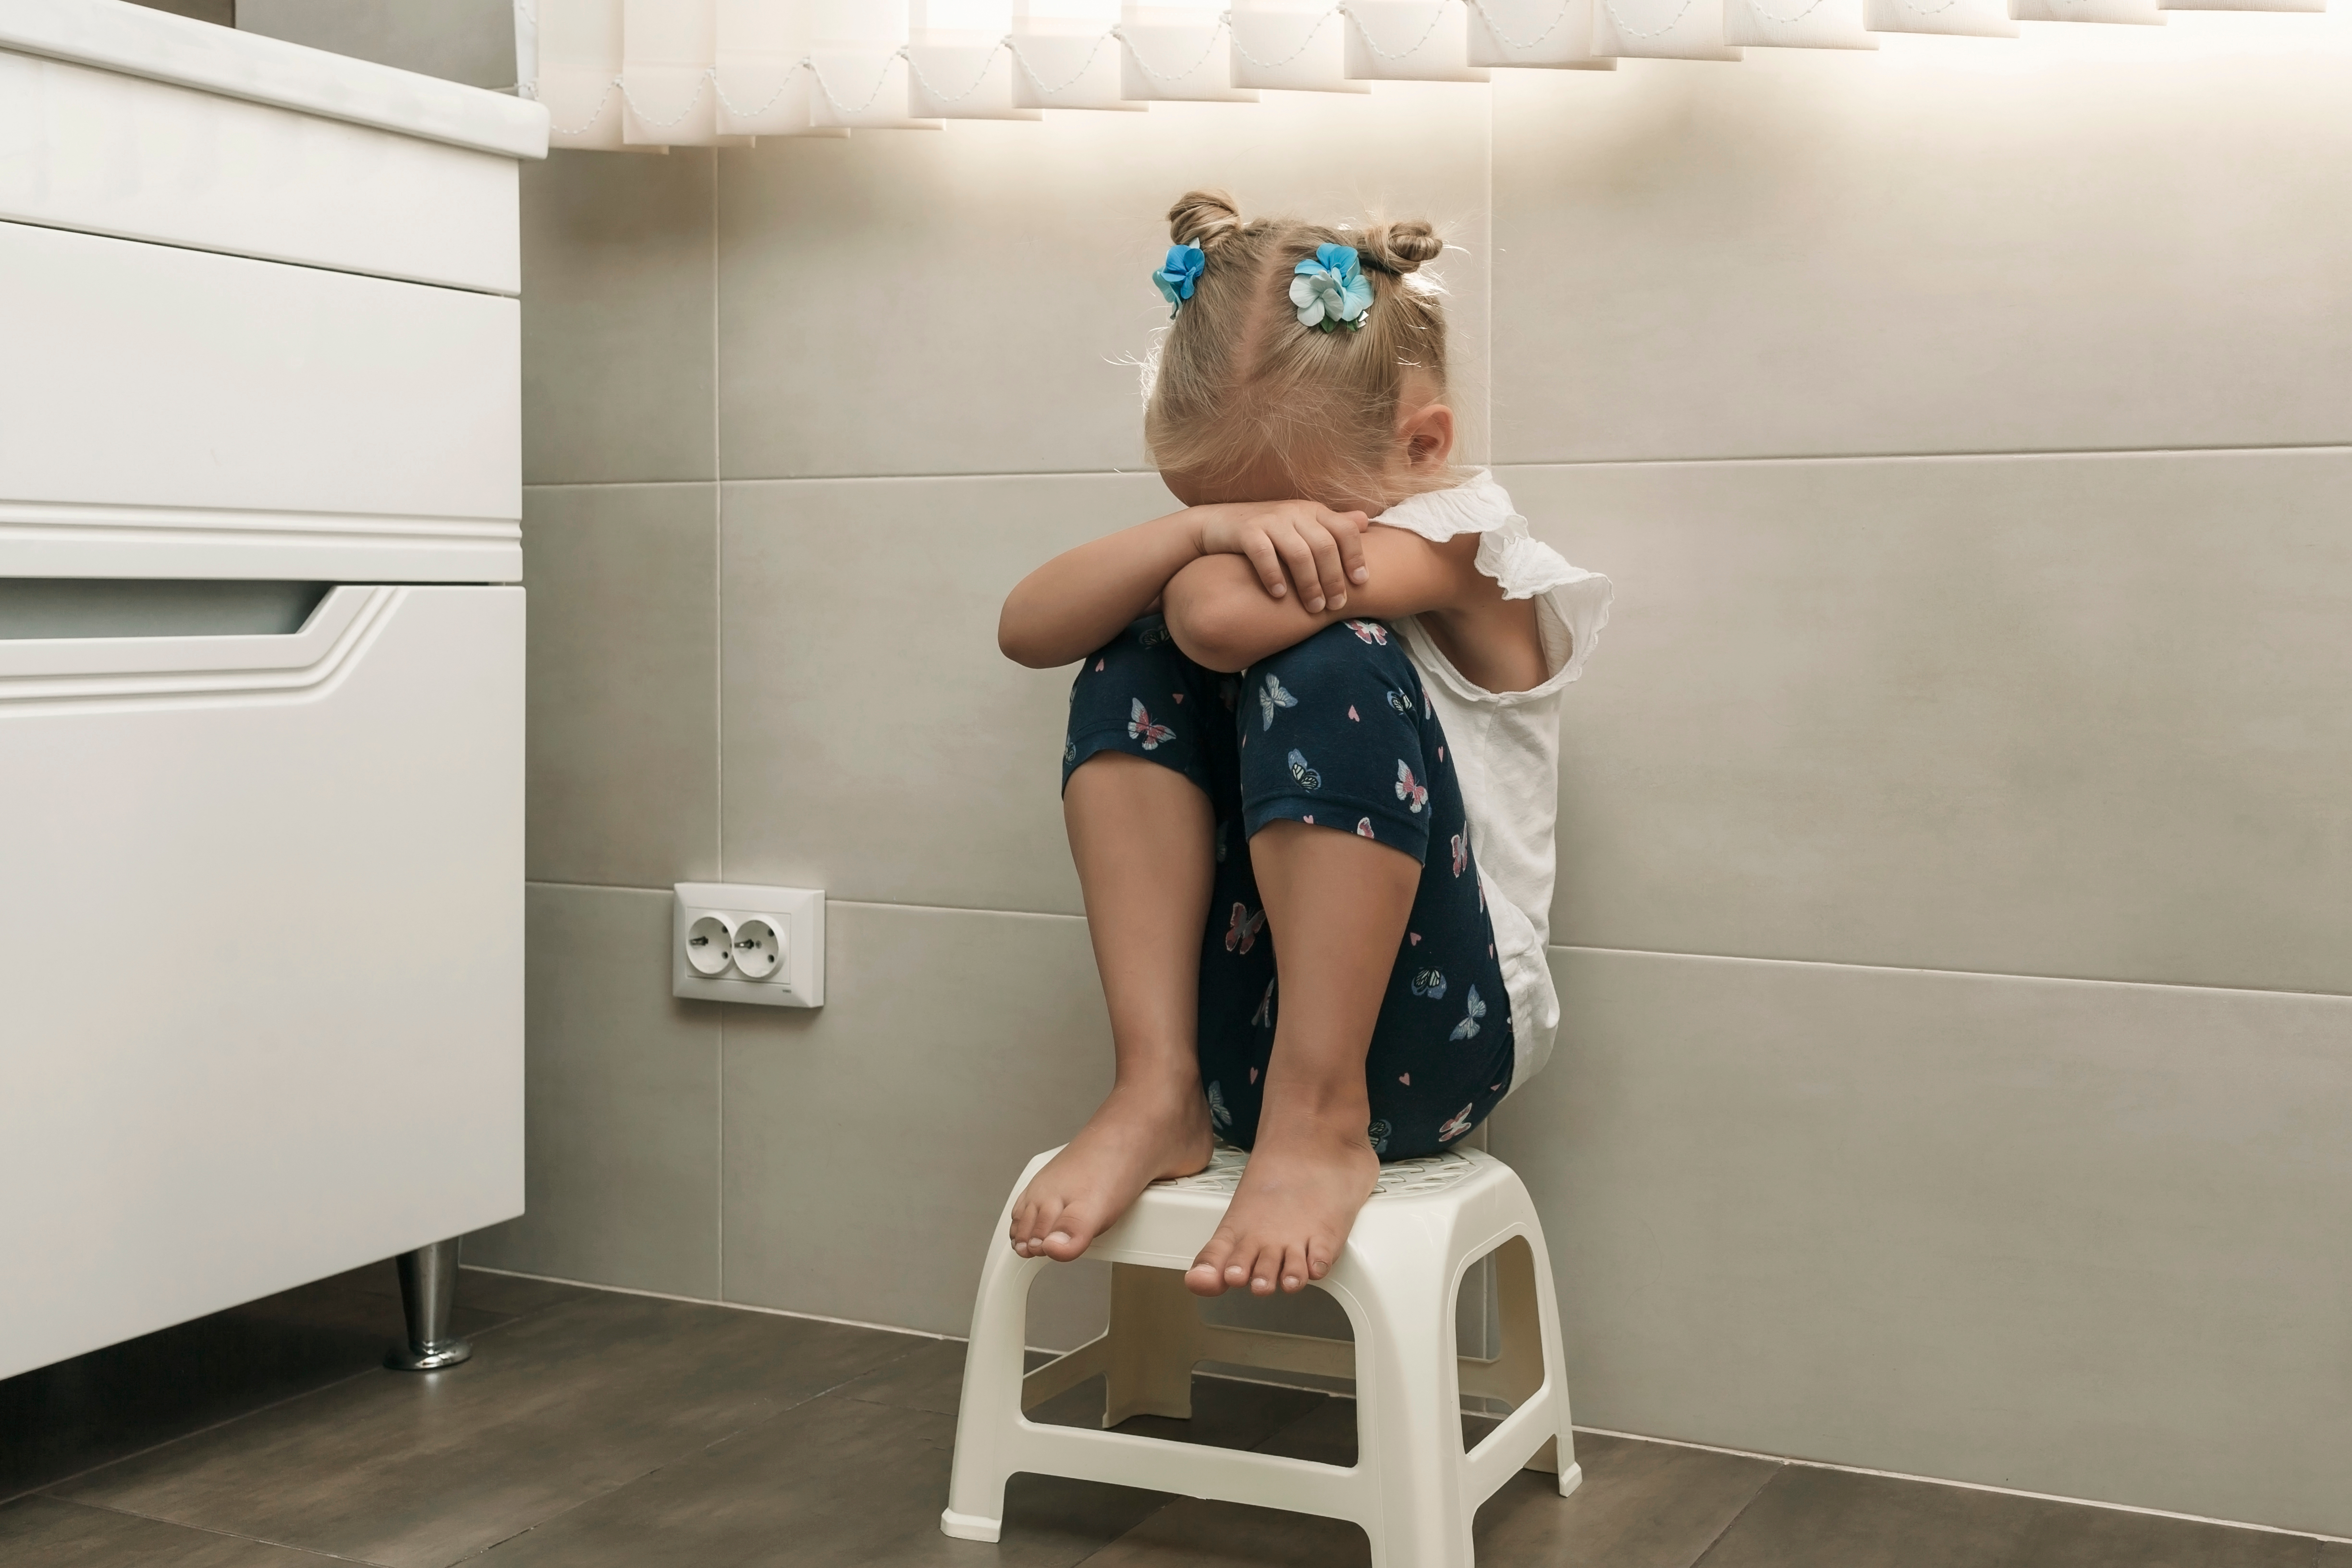 Little girl crying in the bathroom | Source: Shutterstock.com